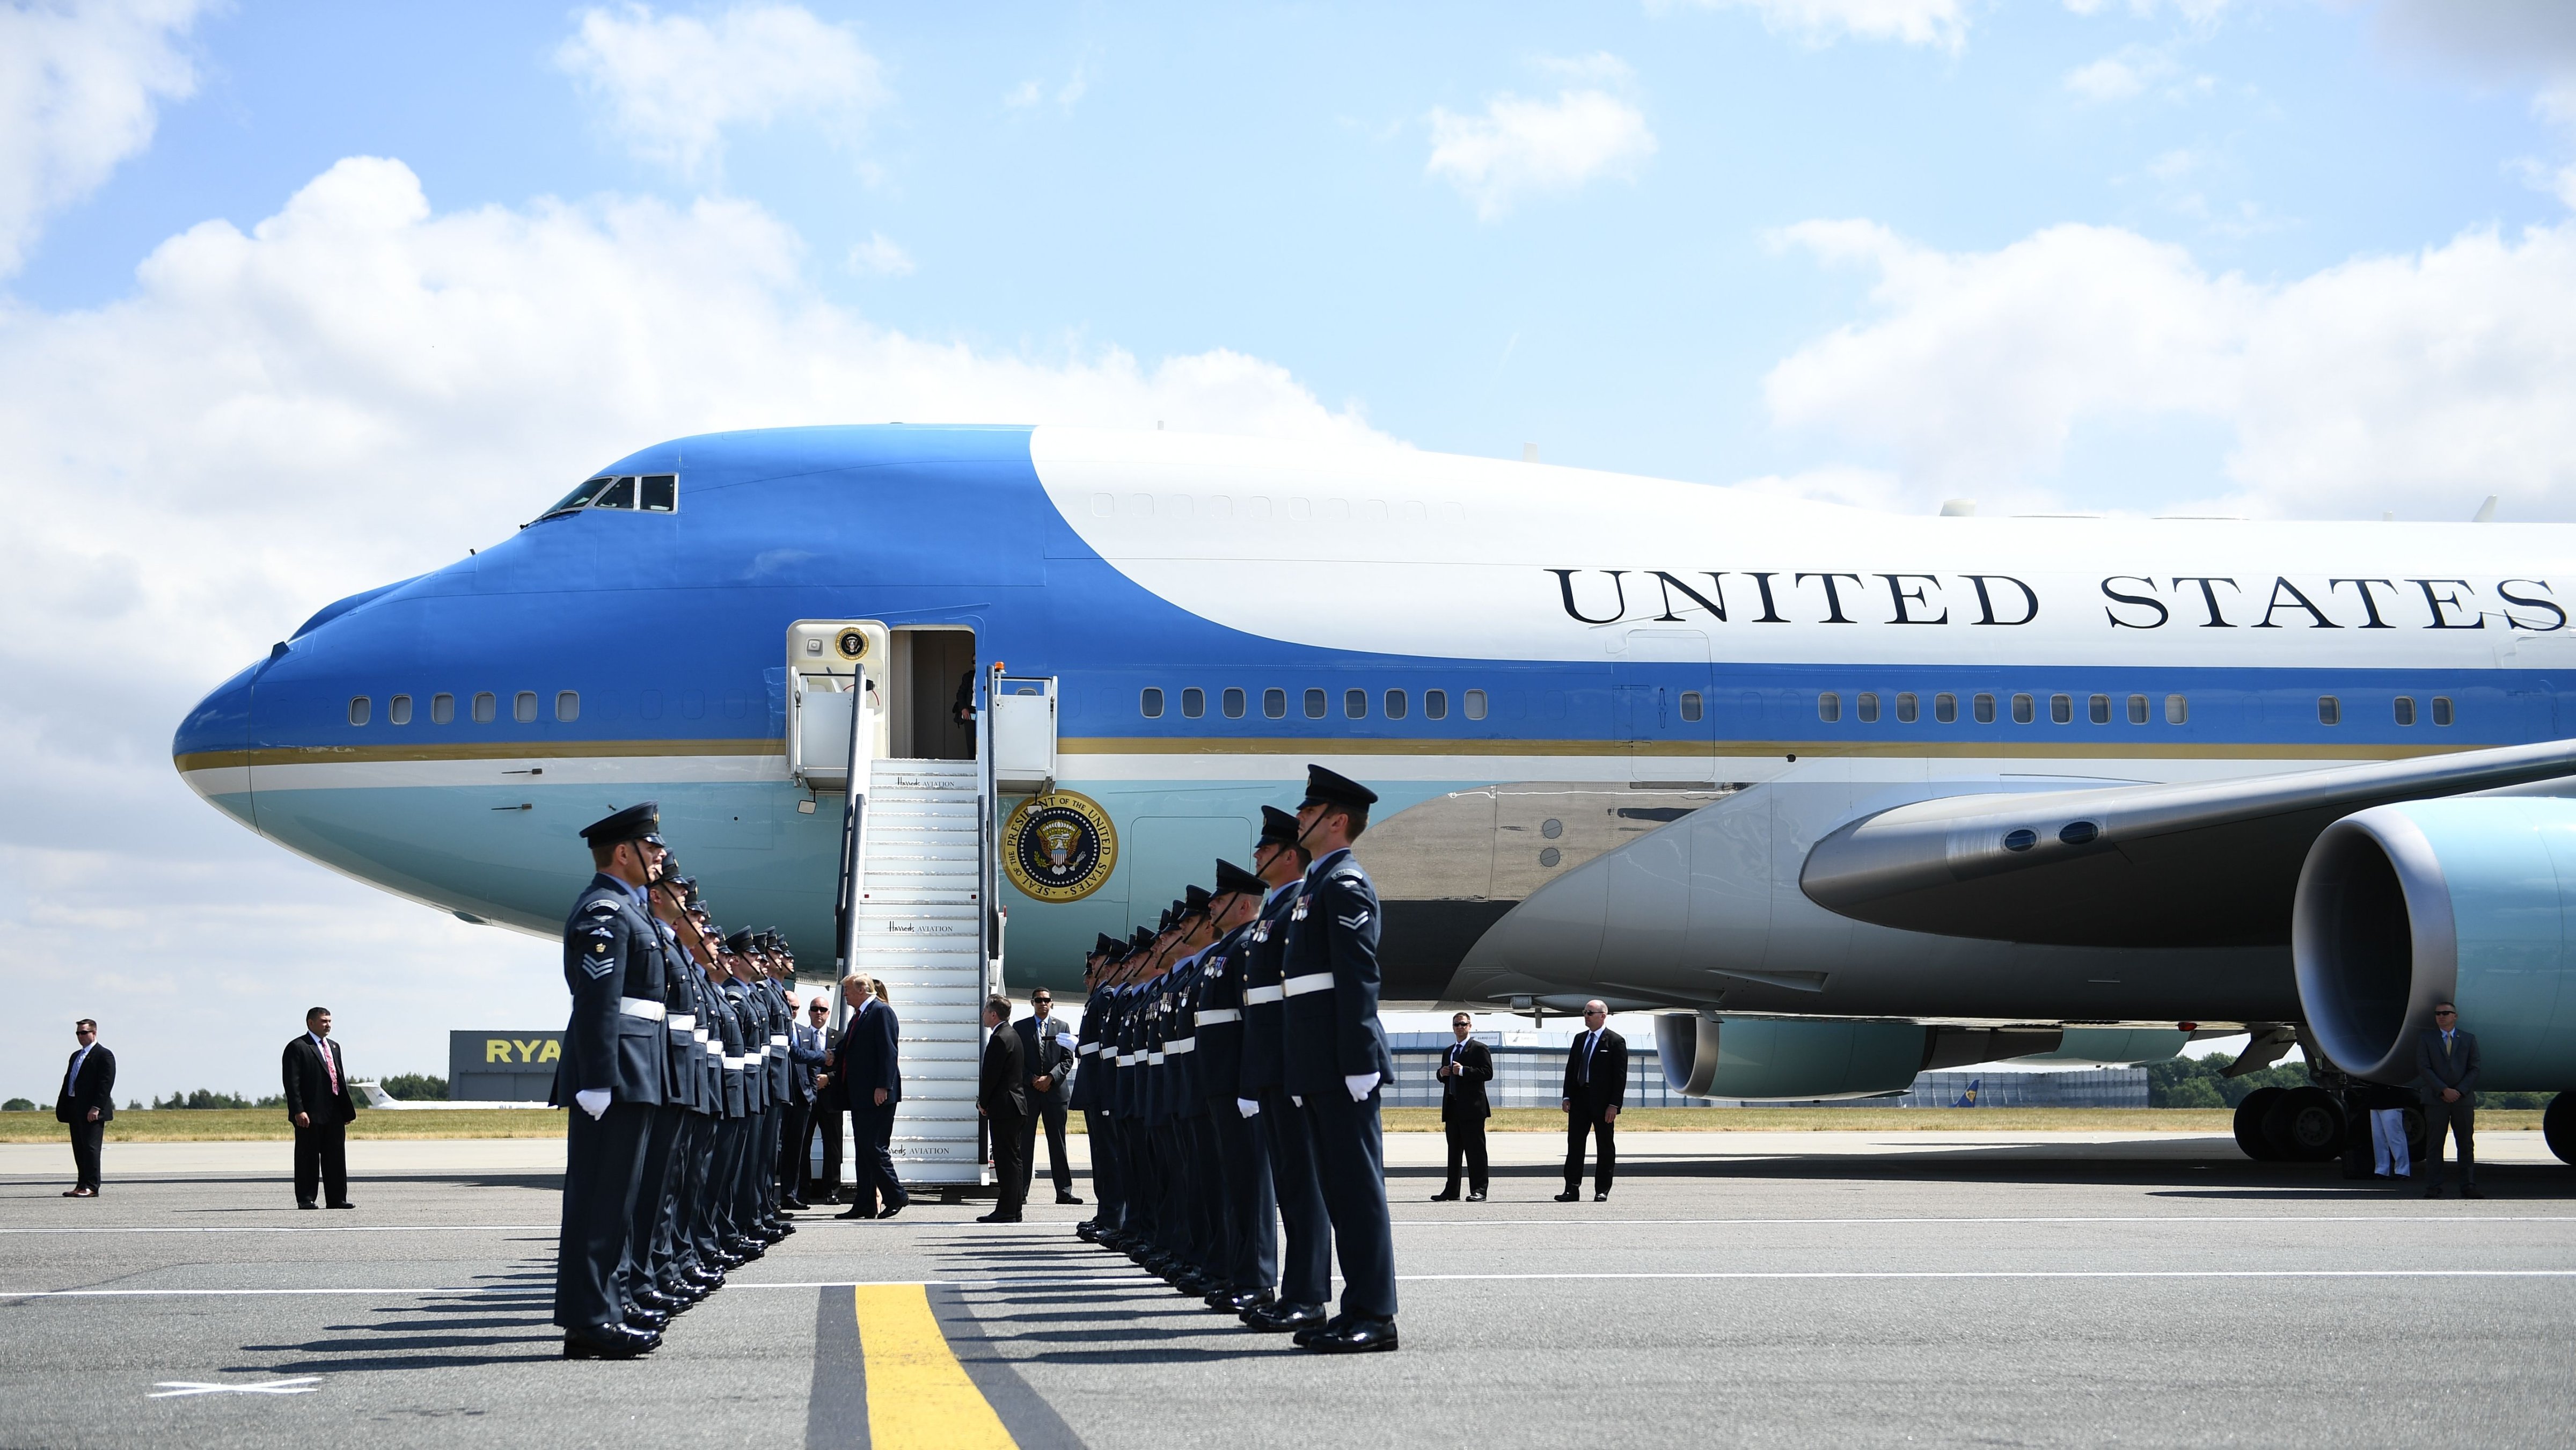 US President Donald Trump (C) and US First Lady Melania Trump are greeted by an honour guard of Royal Air Force personnel after disembarking Air Force One at Stansted Airport, north of London on July 12, 2018, as he begins his first visit to the UK as US president. (BRENDAN SMIALOWSKI&mdash;AFP/Getty Images)